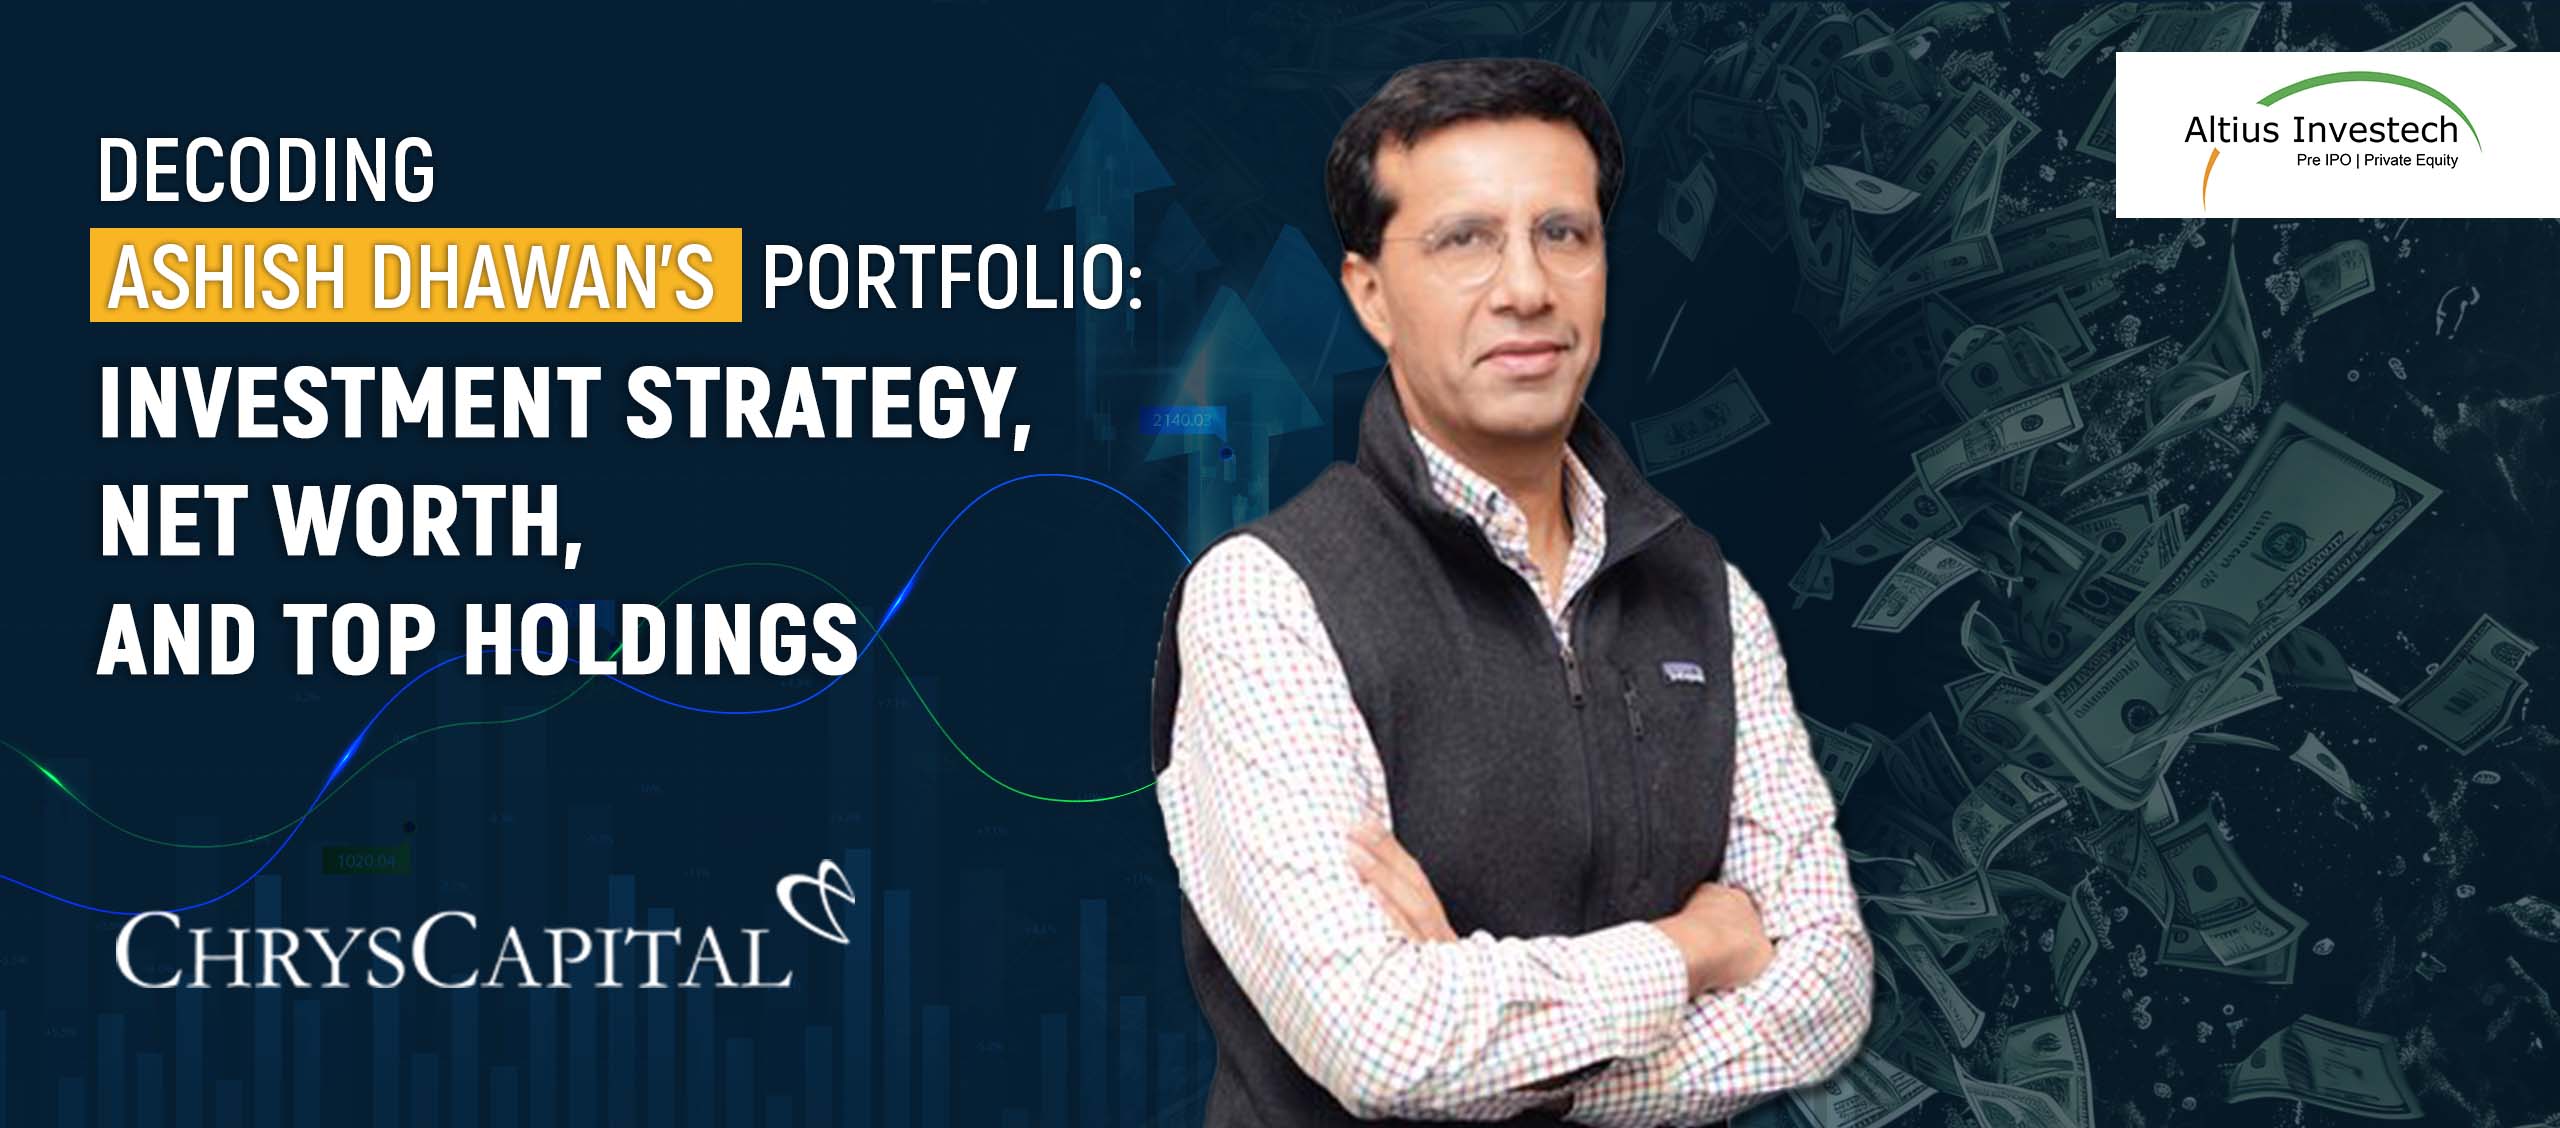 You are currently viewing Decoding Ashish Dhawan Portfolio: Investment Strategy, Net Worth, and Top Holdings